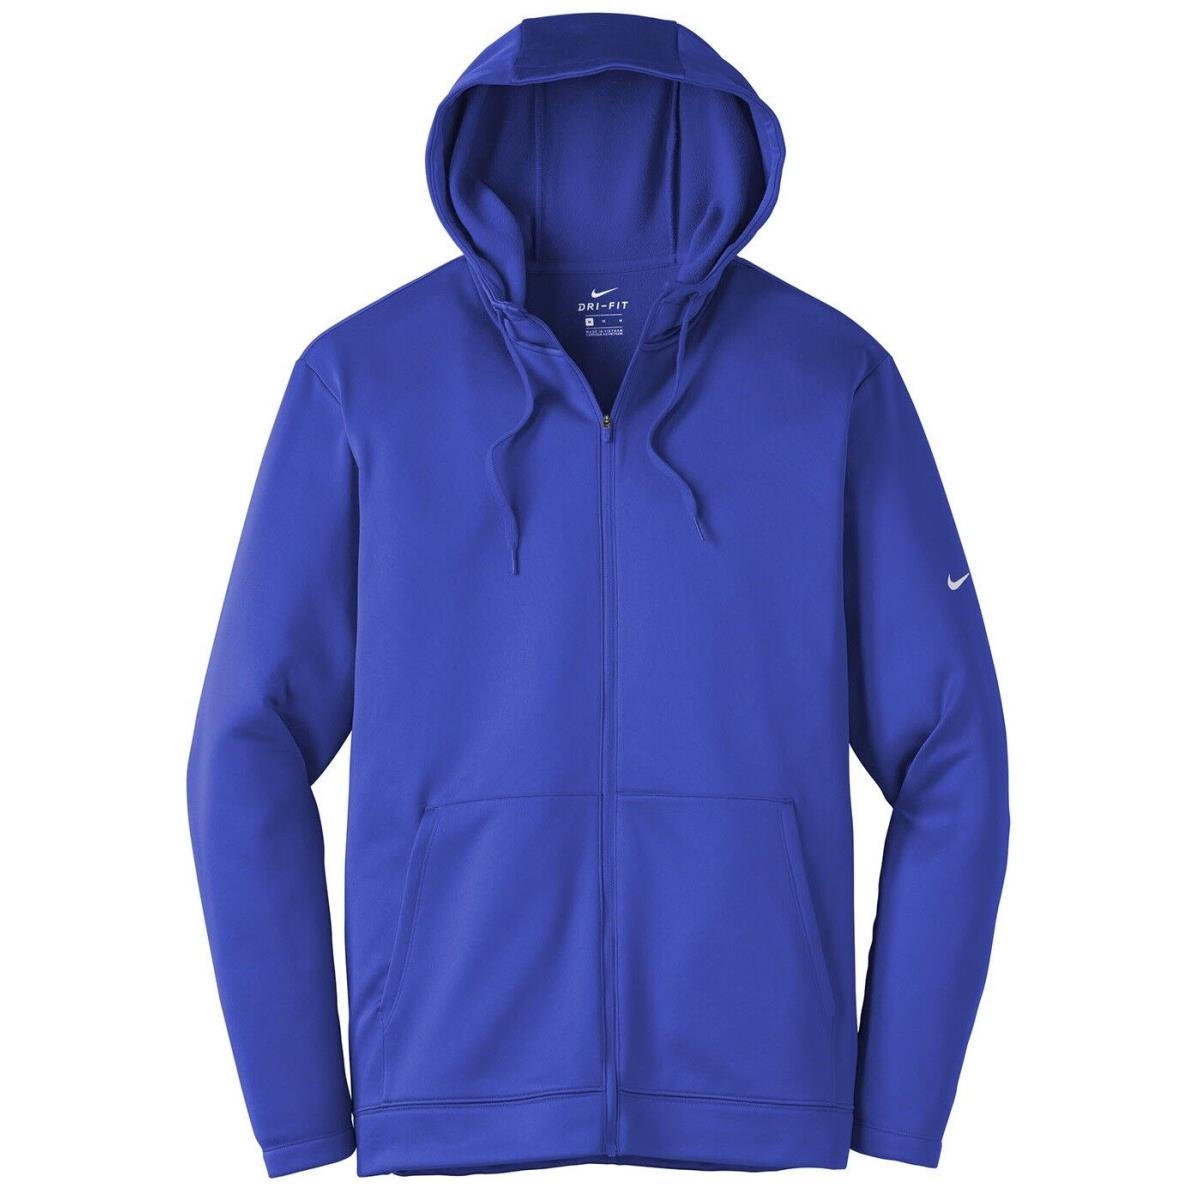 Men`s Nike Breathable Wicking Therma-fit Hoodie Zip UP Drawcords XS-4XL Royal Blue